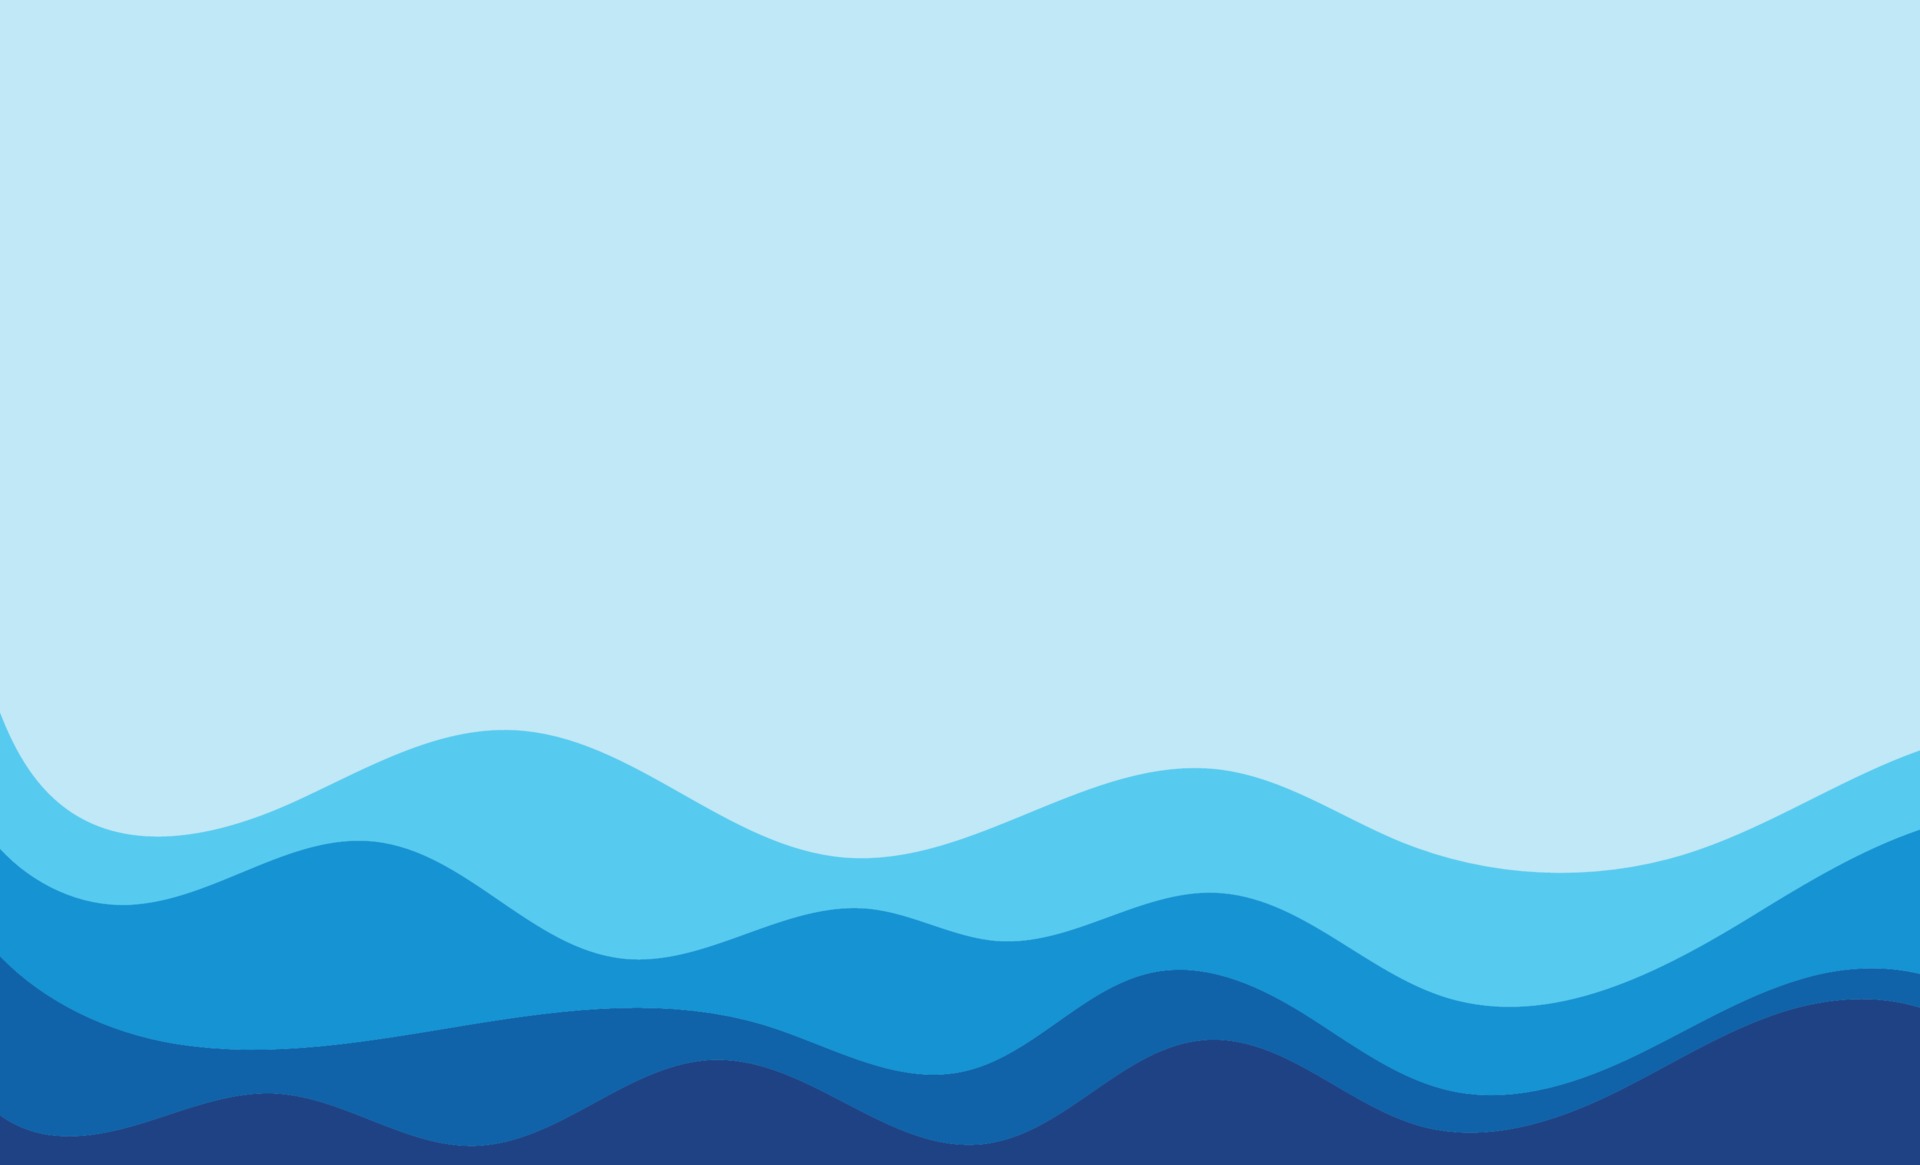 wave blue background wallpaper free vector